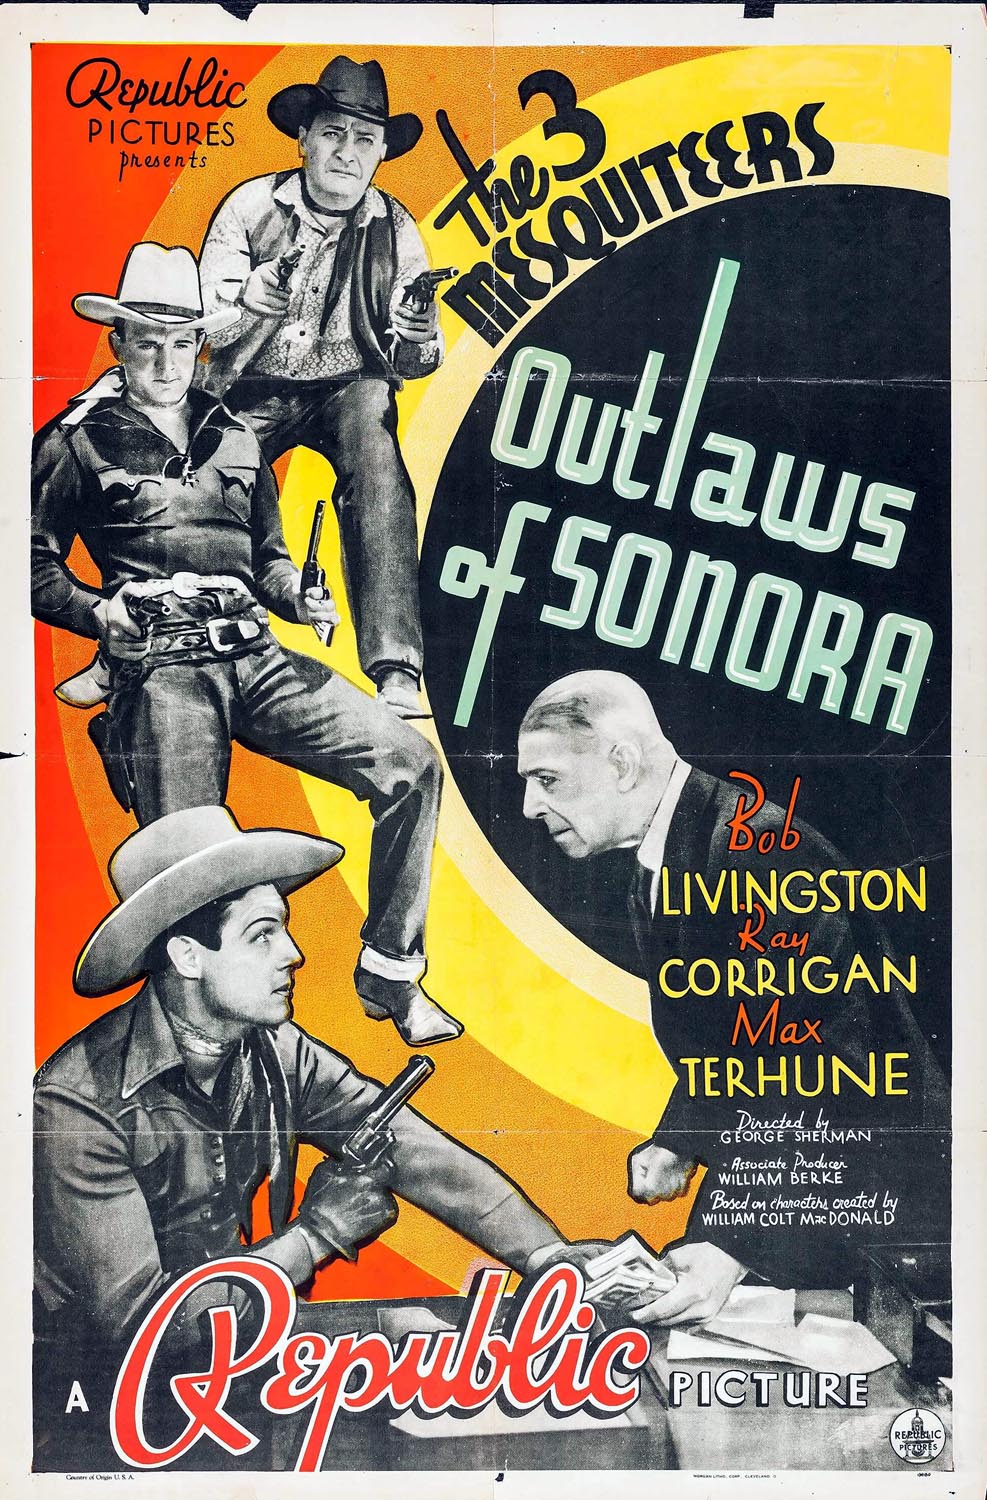 OUTLAWS OF SONORA